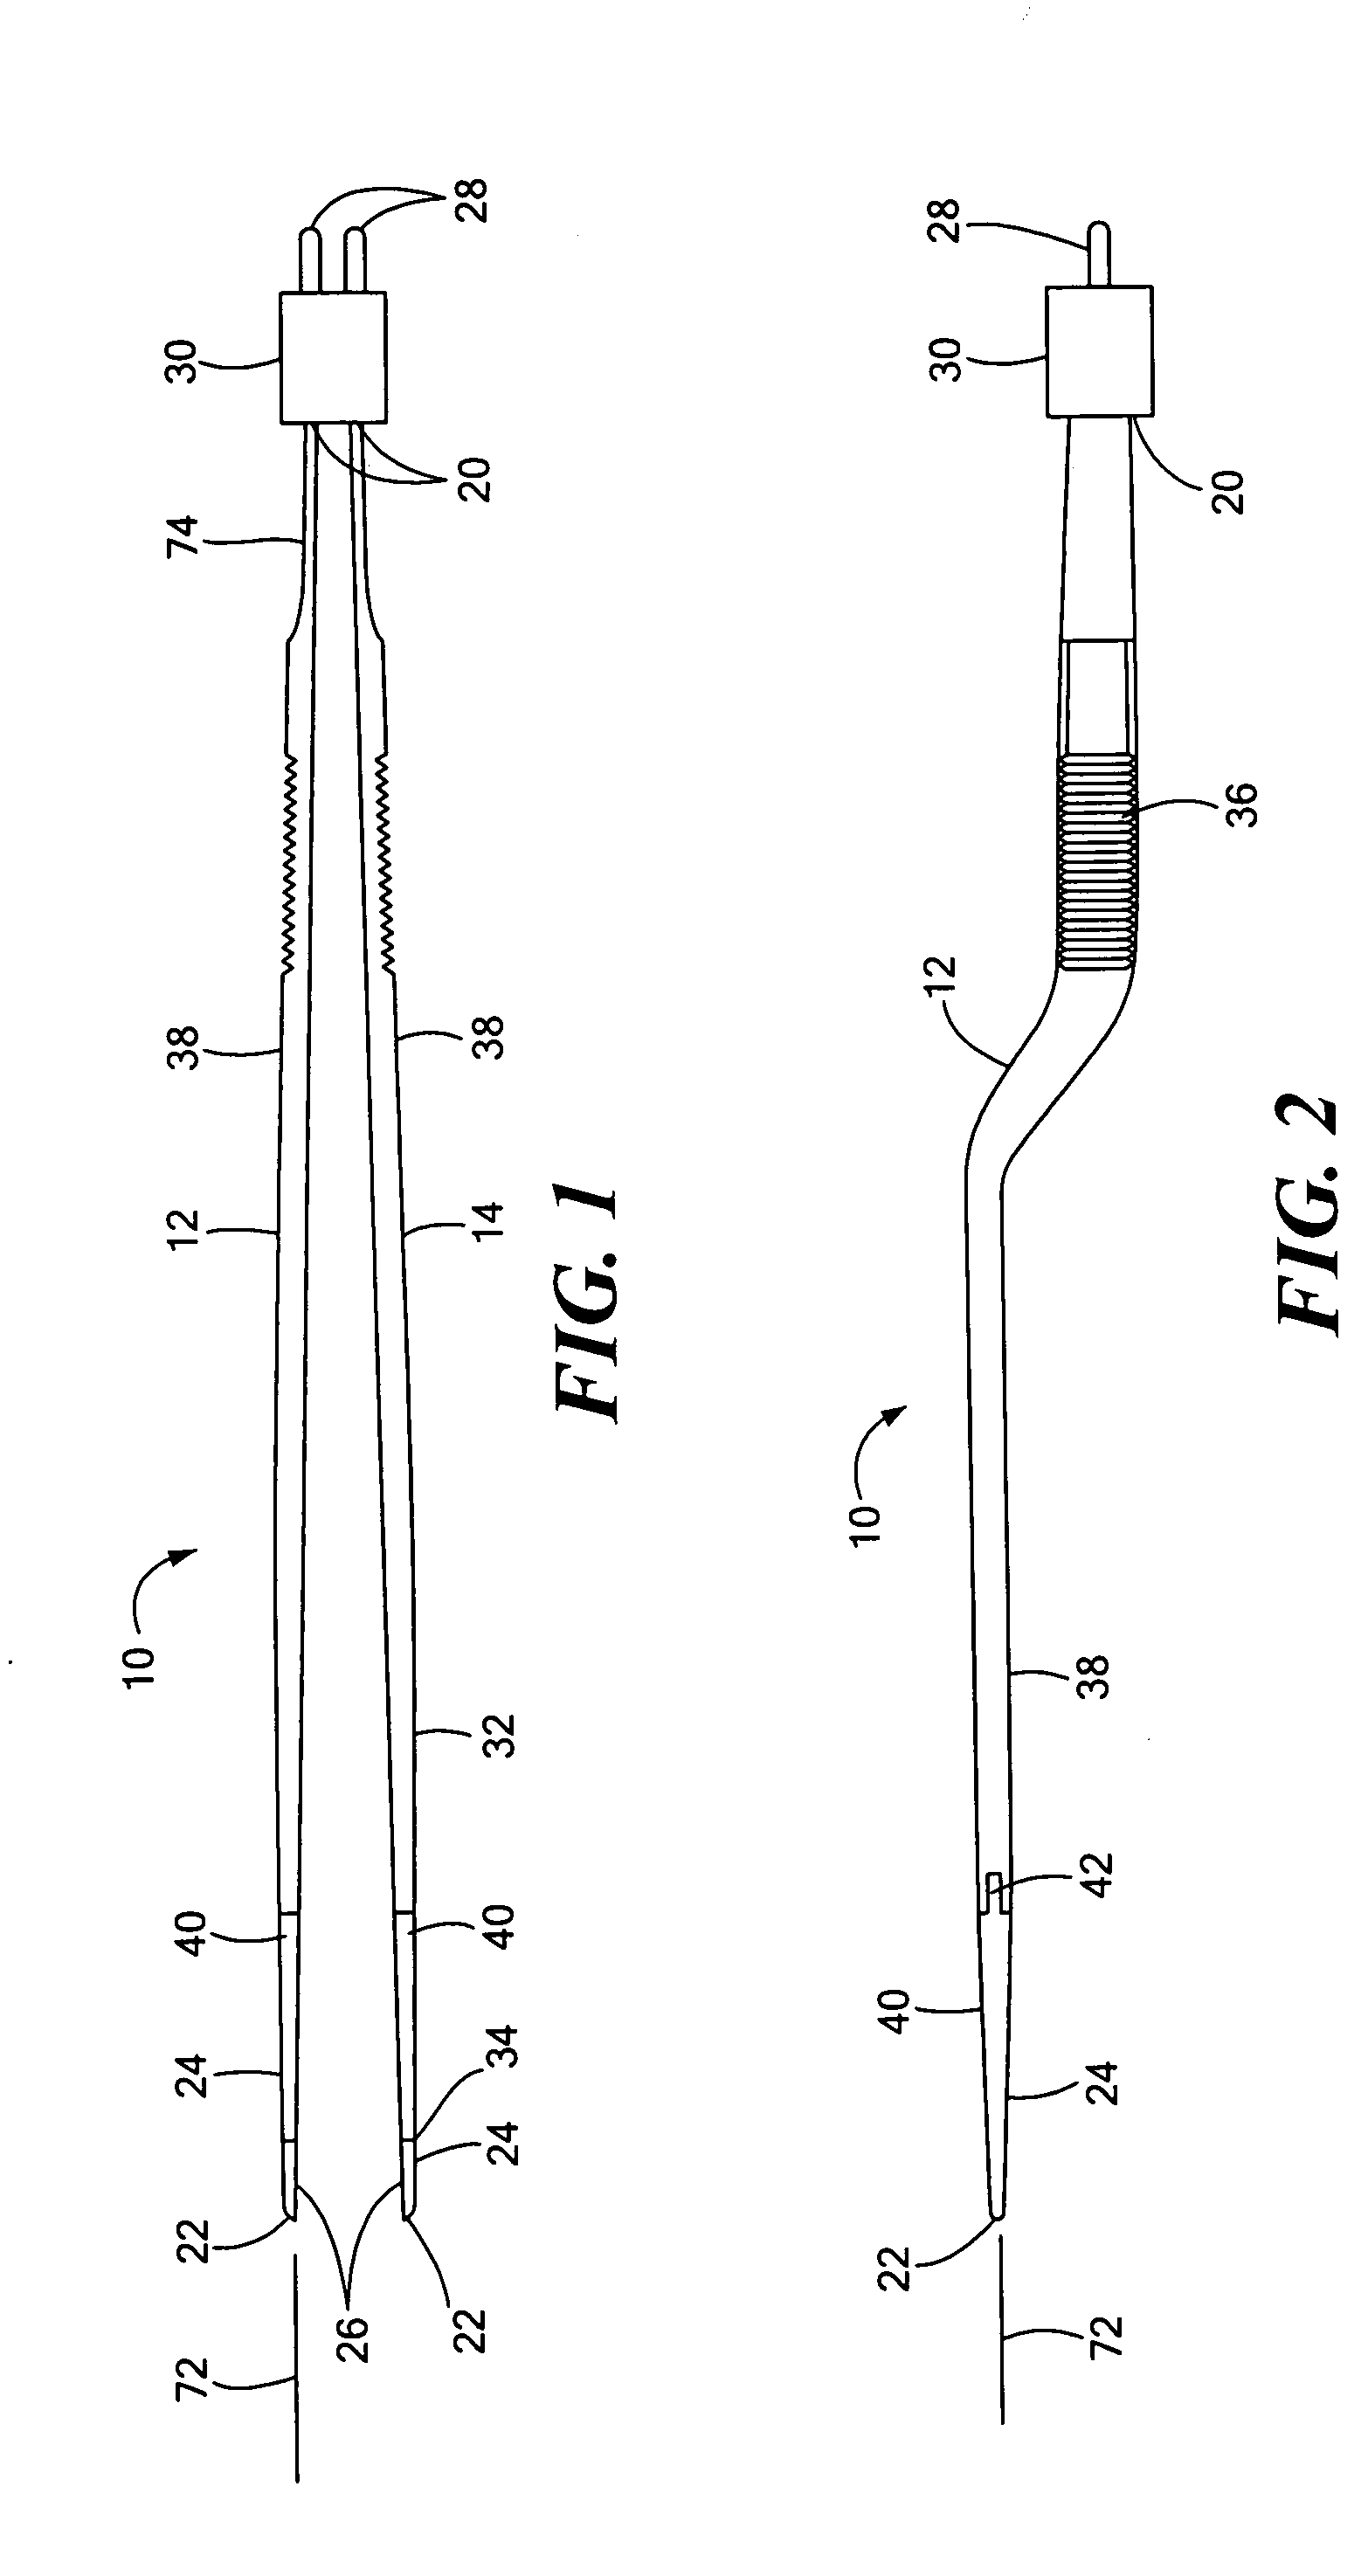 Electrosurgical forceps with composite material tips